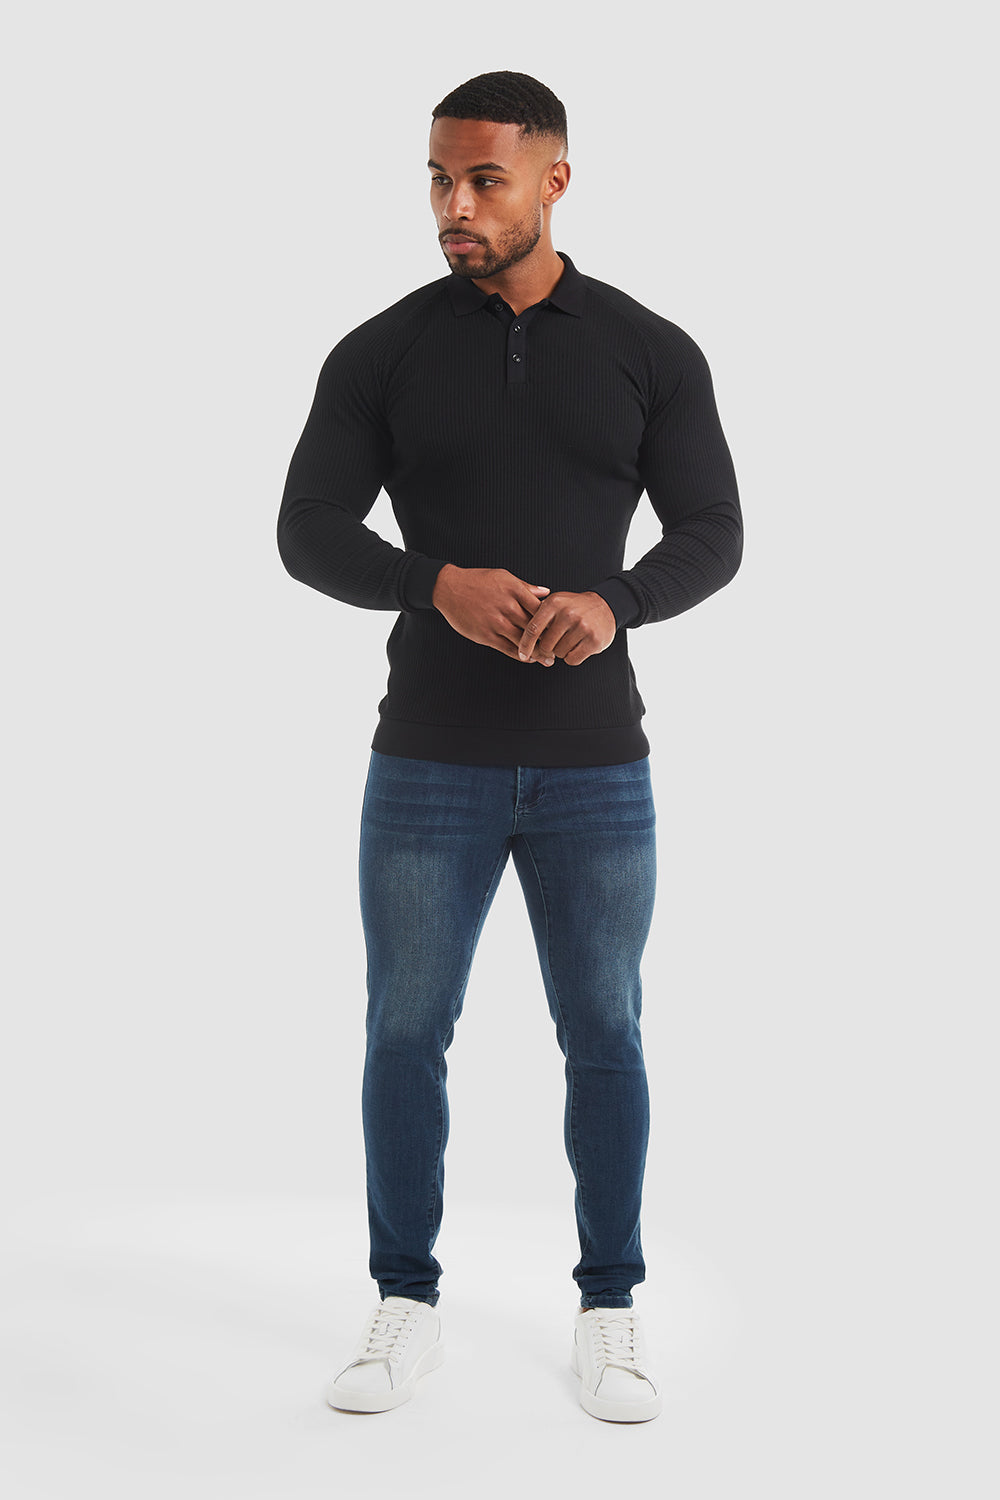 Ribbed Polo (LS) in Black - TAILORED ATHLETE - ROW